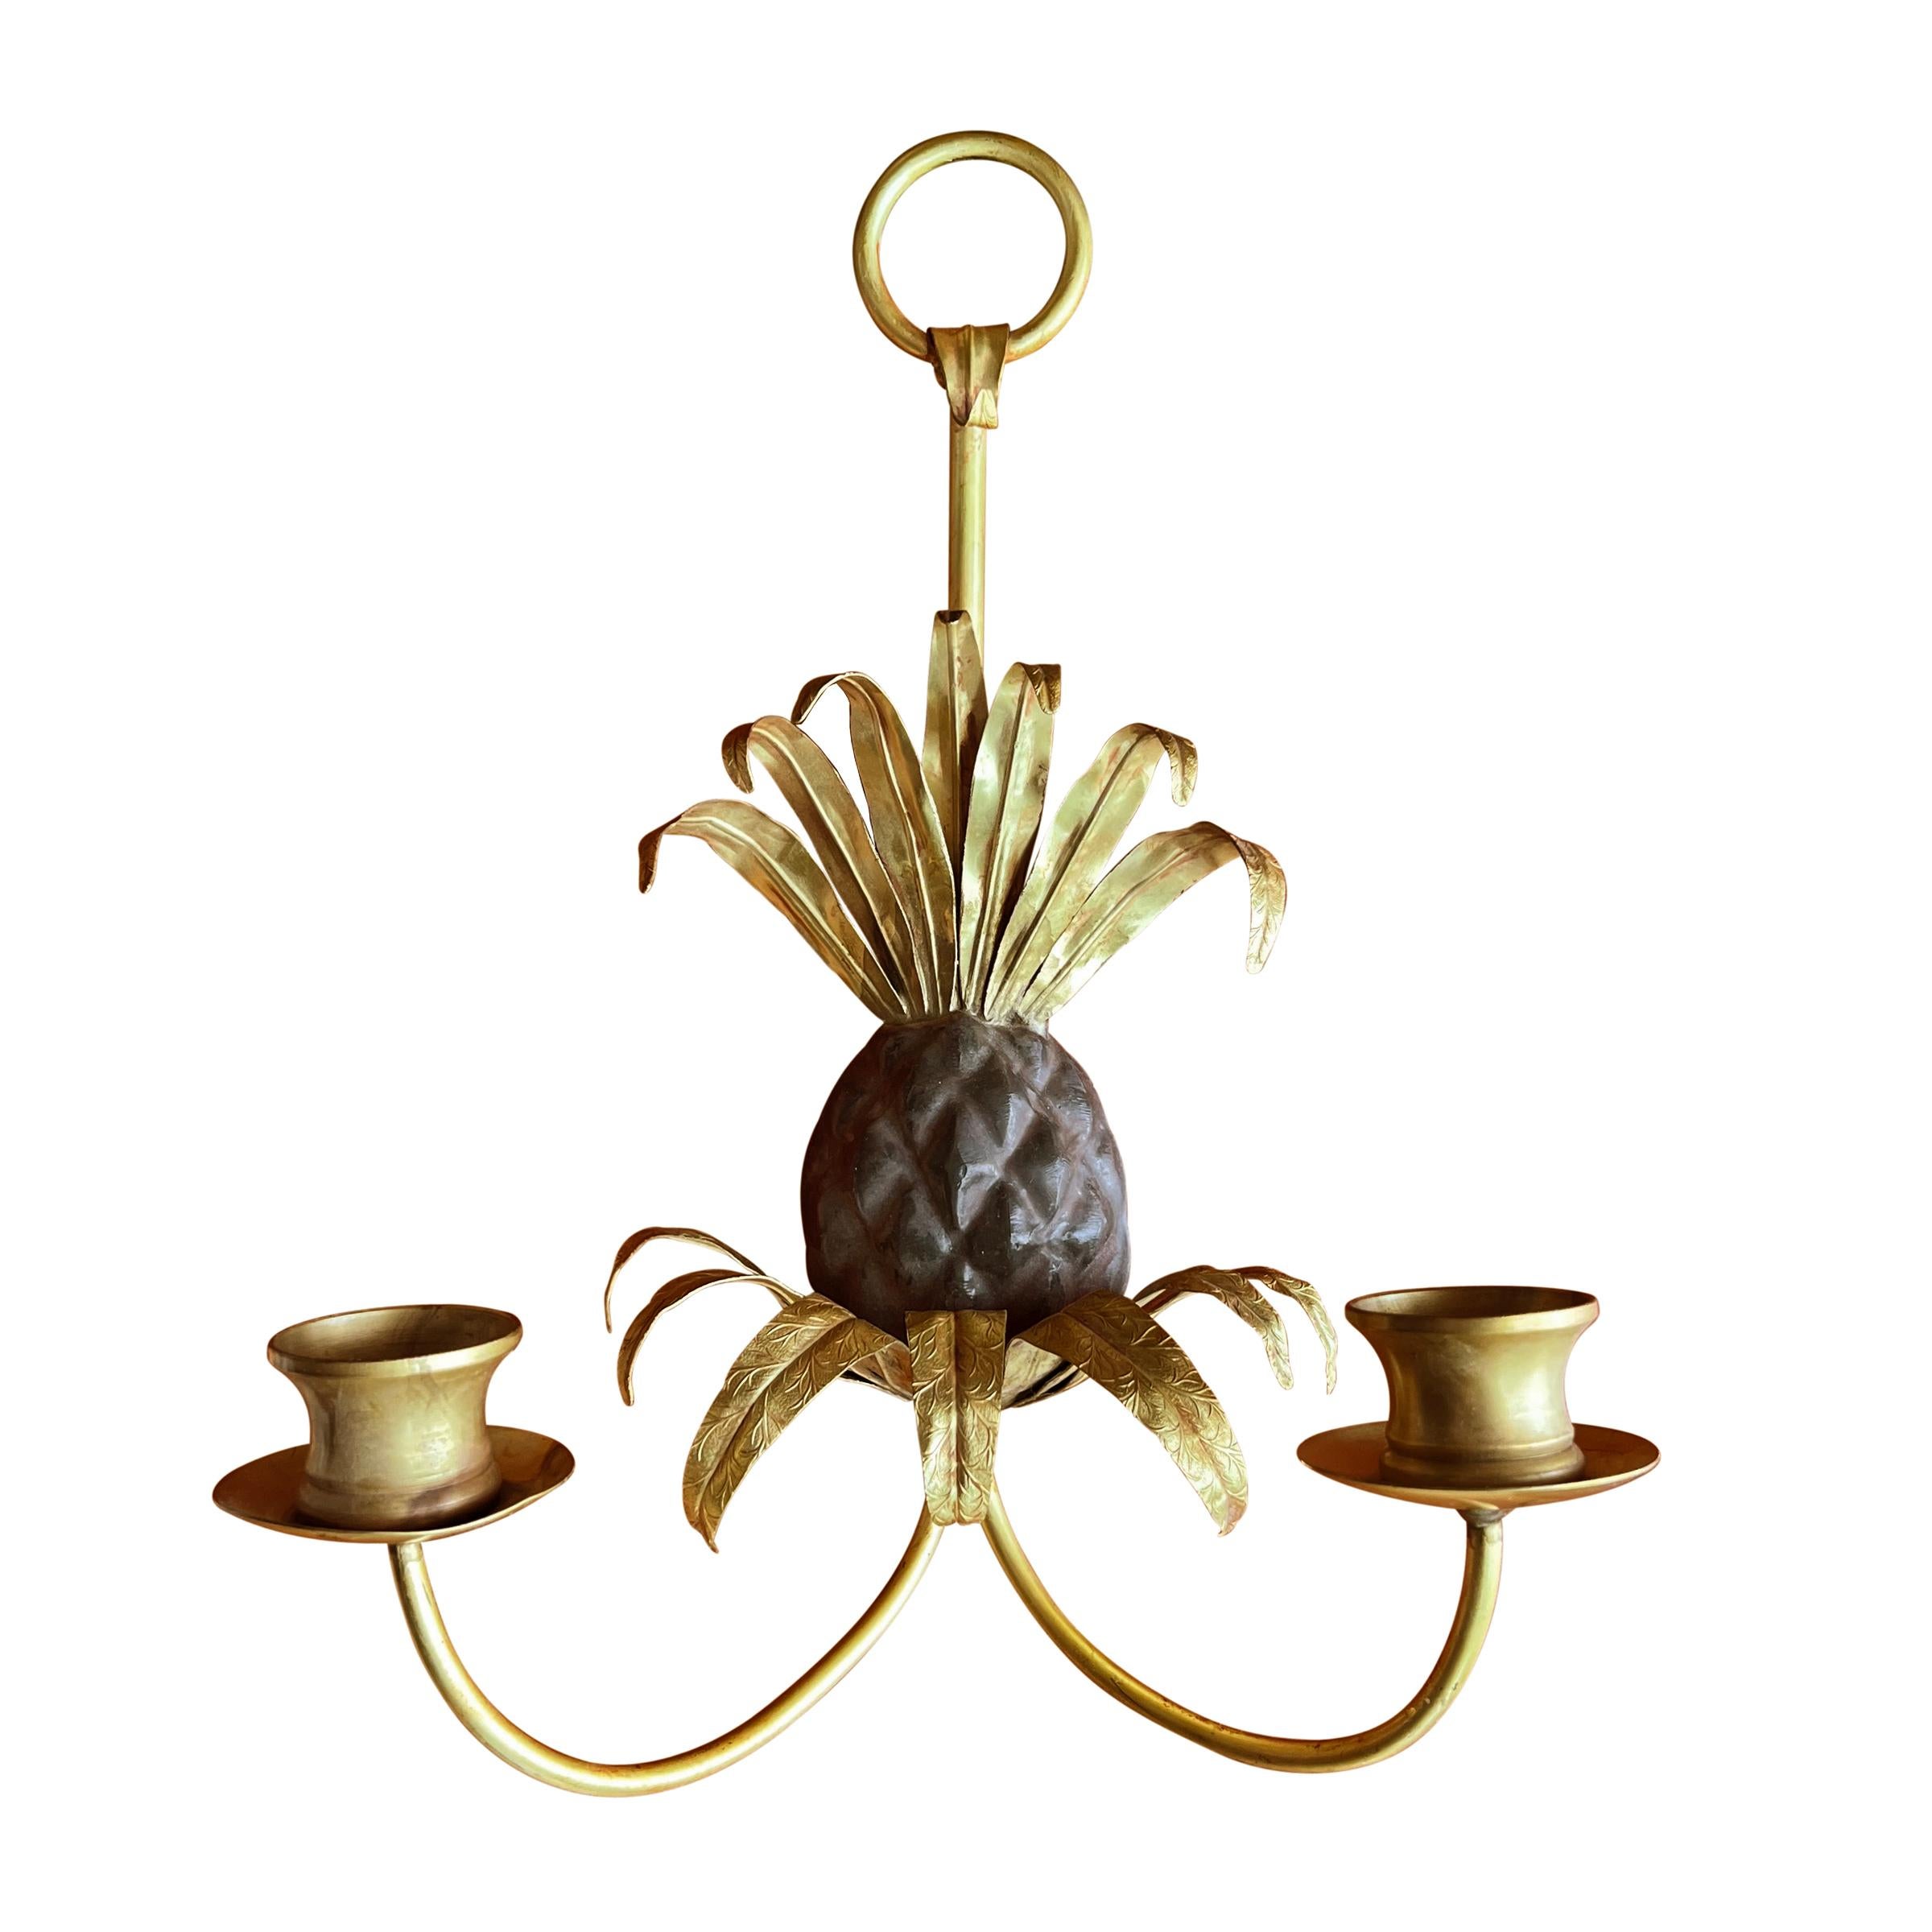 French Pair of Vintage Pineapple Candle Sconces